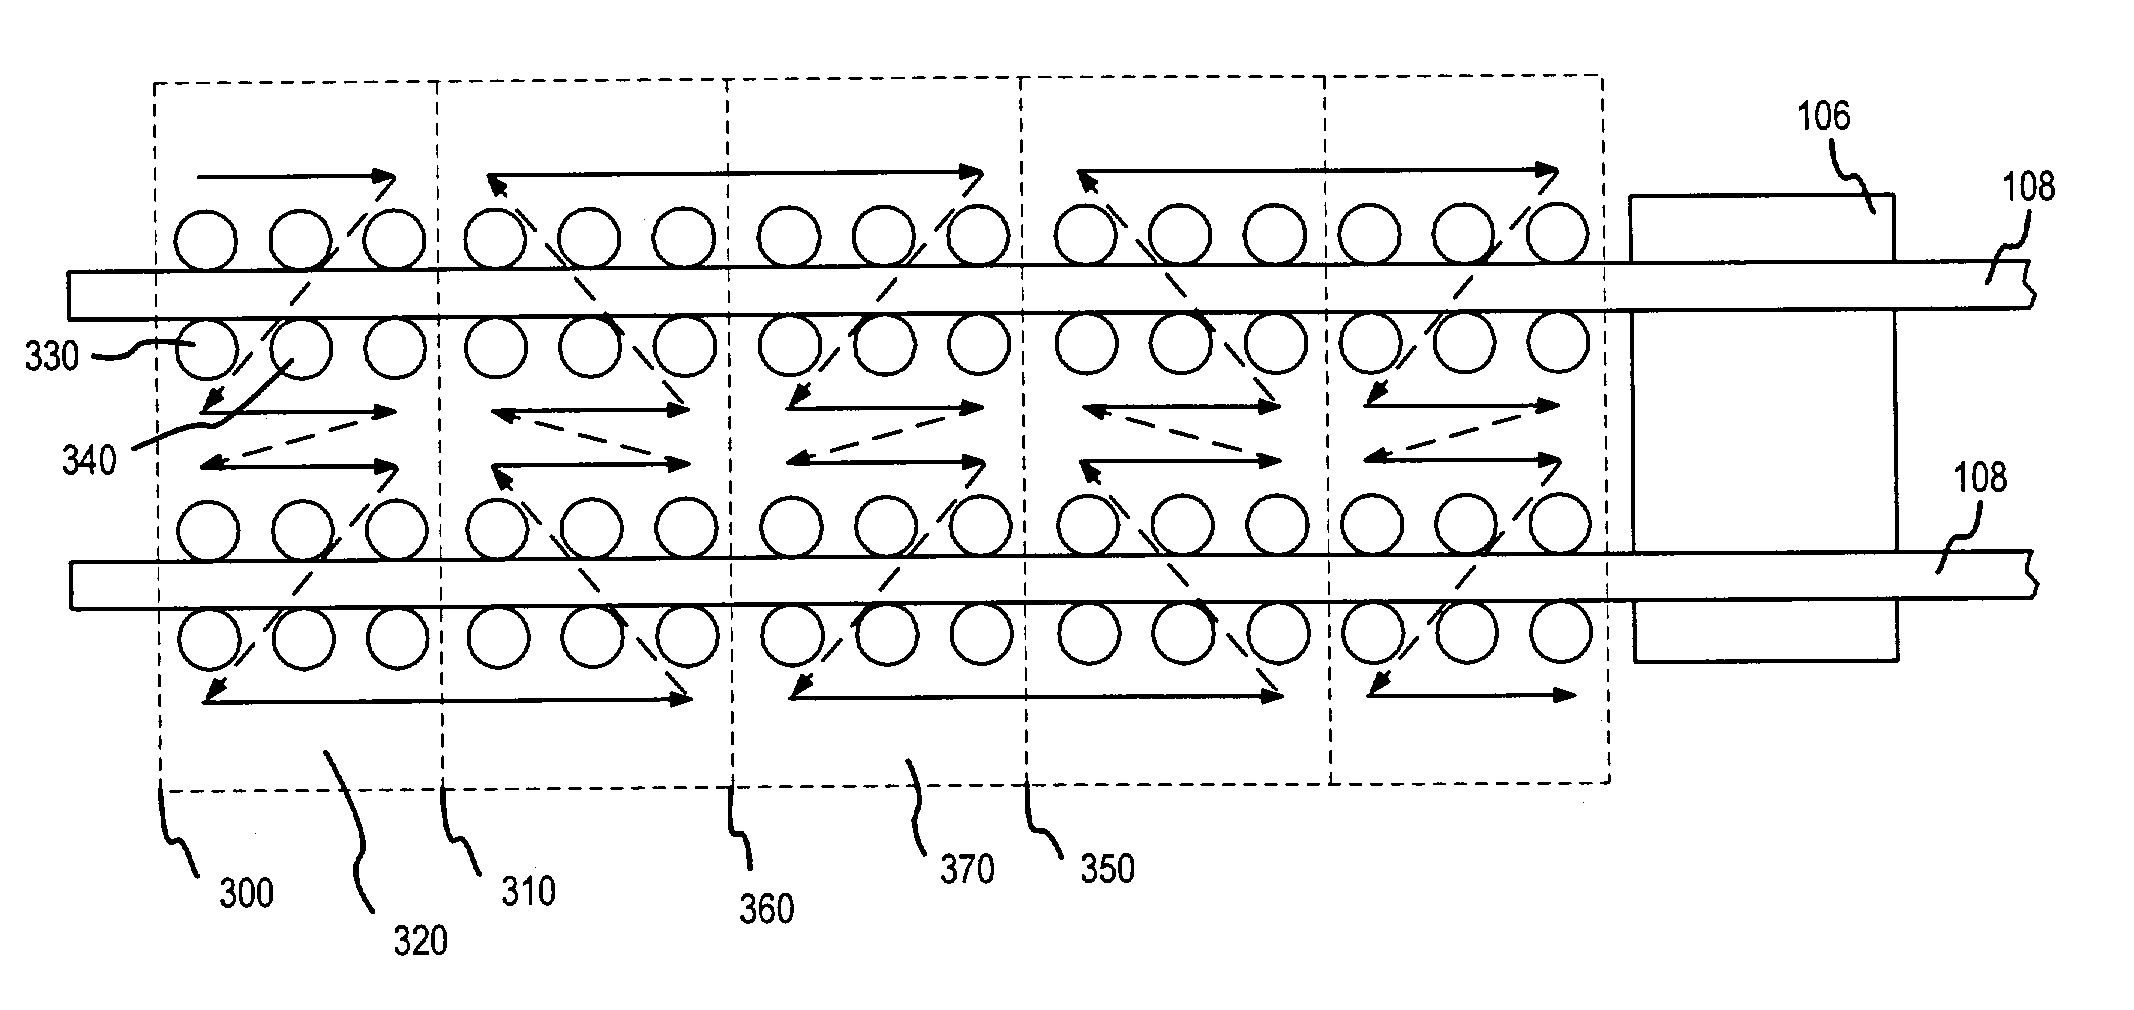 Apparatus and method for writing data to an information storage disc